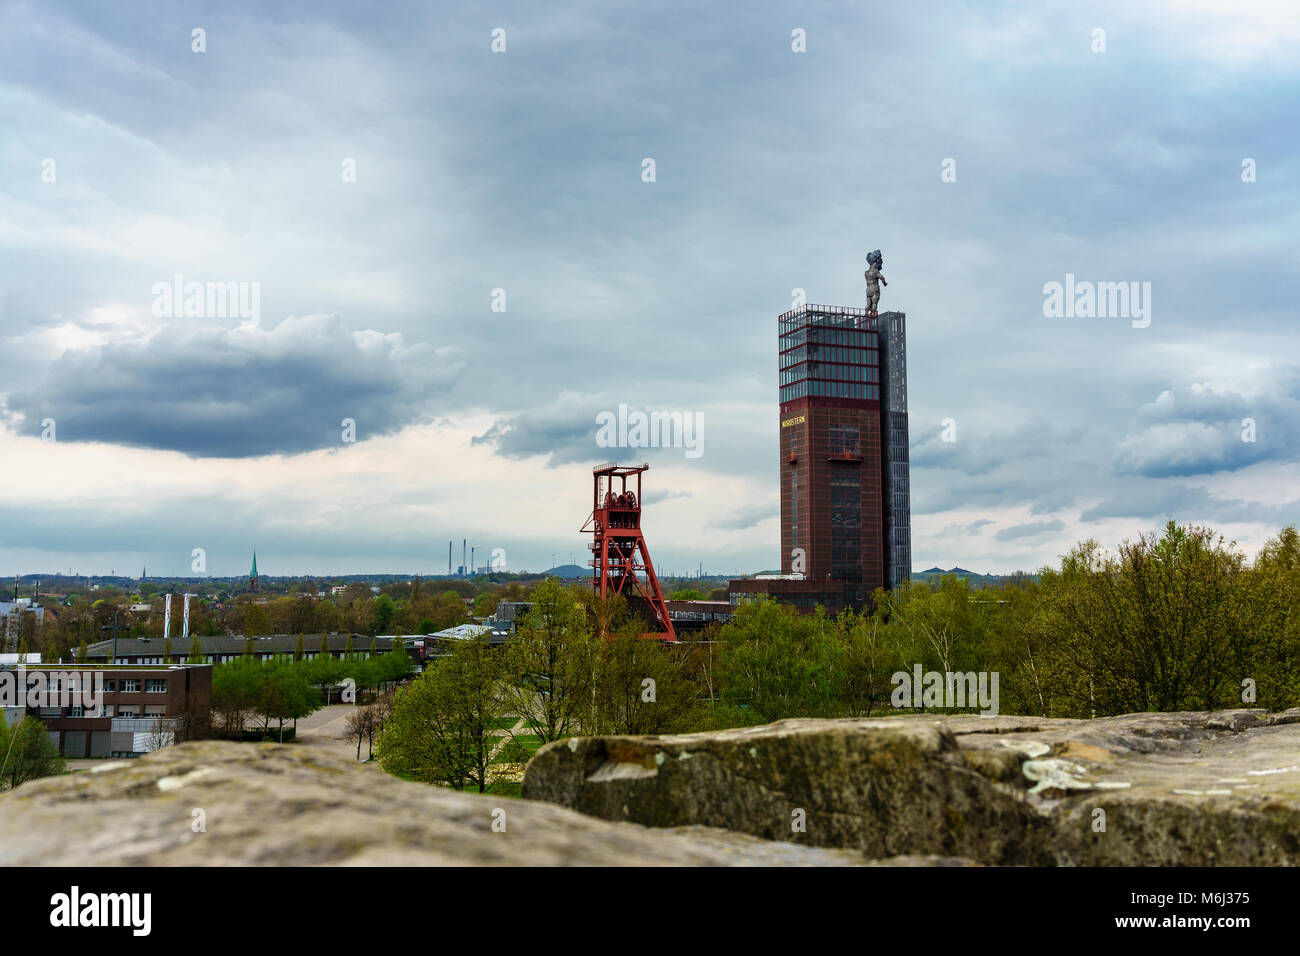 Nice view from the nordsternpark in gelsenkirchen germany Stock Photo